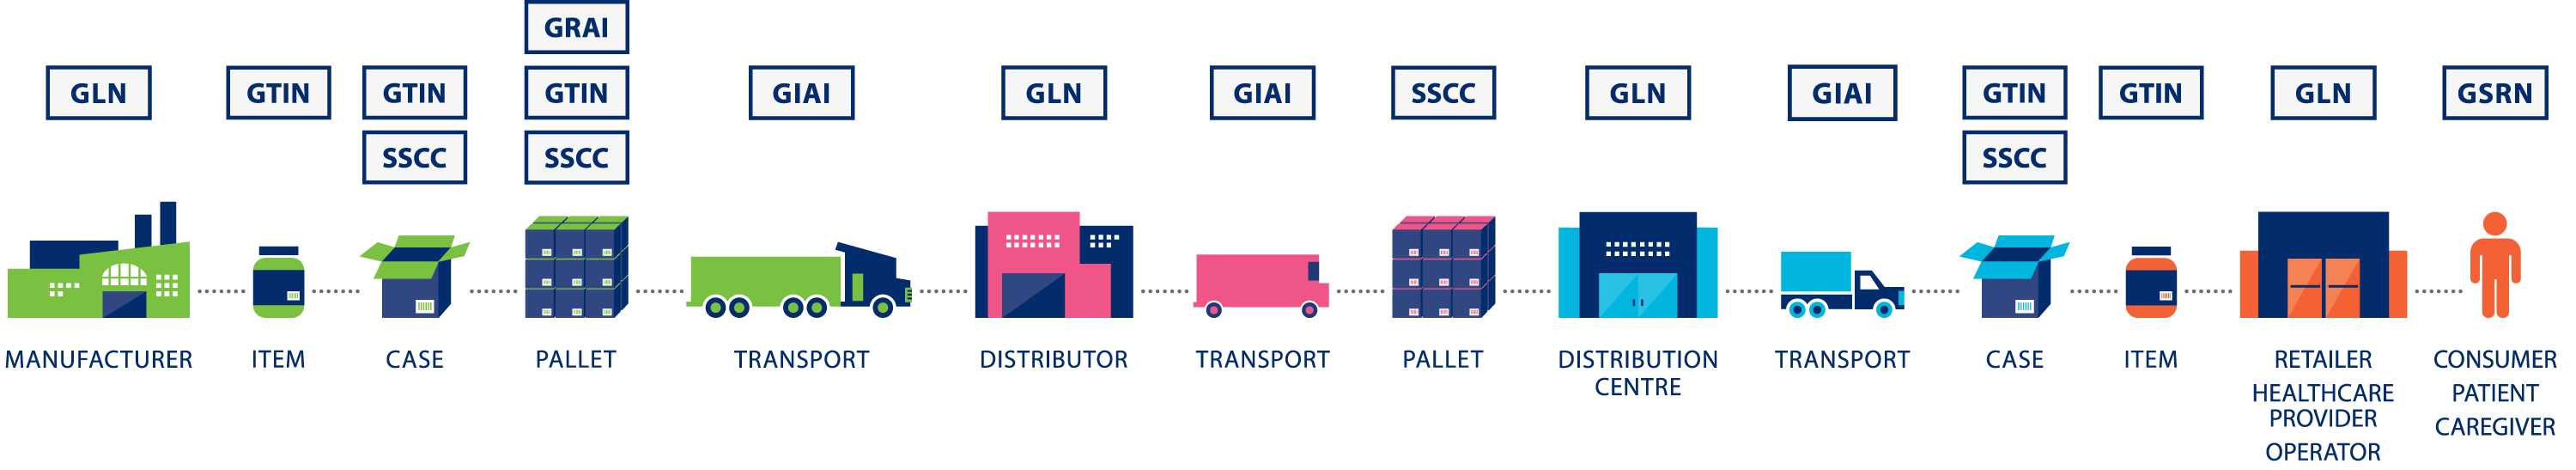 GS1 General Supply Chain with Labels Identfiers